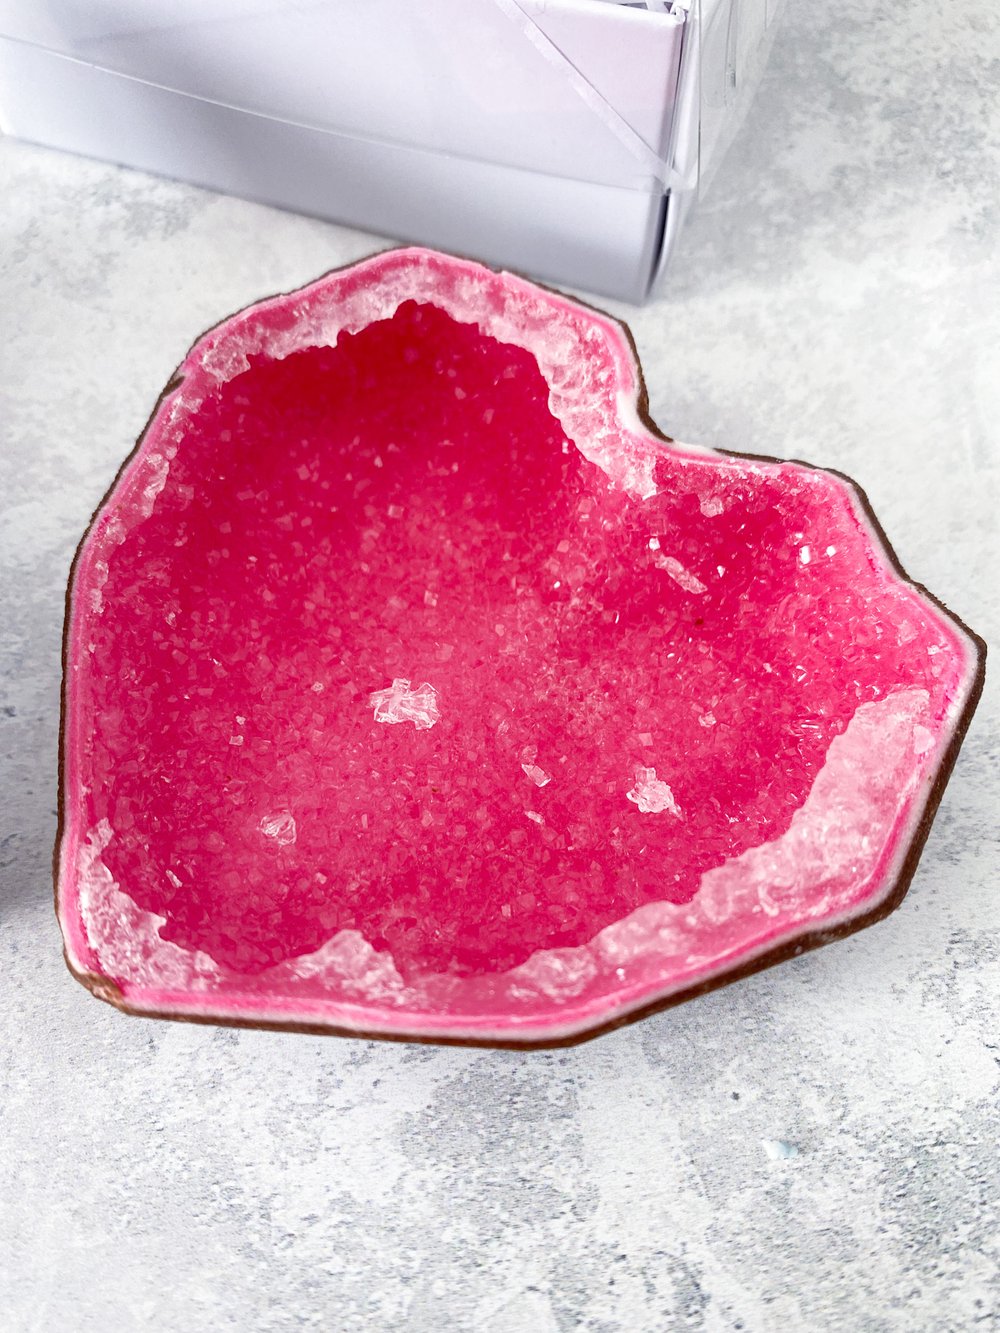 Shop Edible Crystals Gifts — Candy Rocks